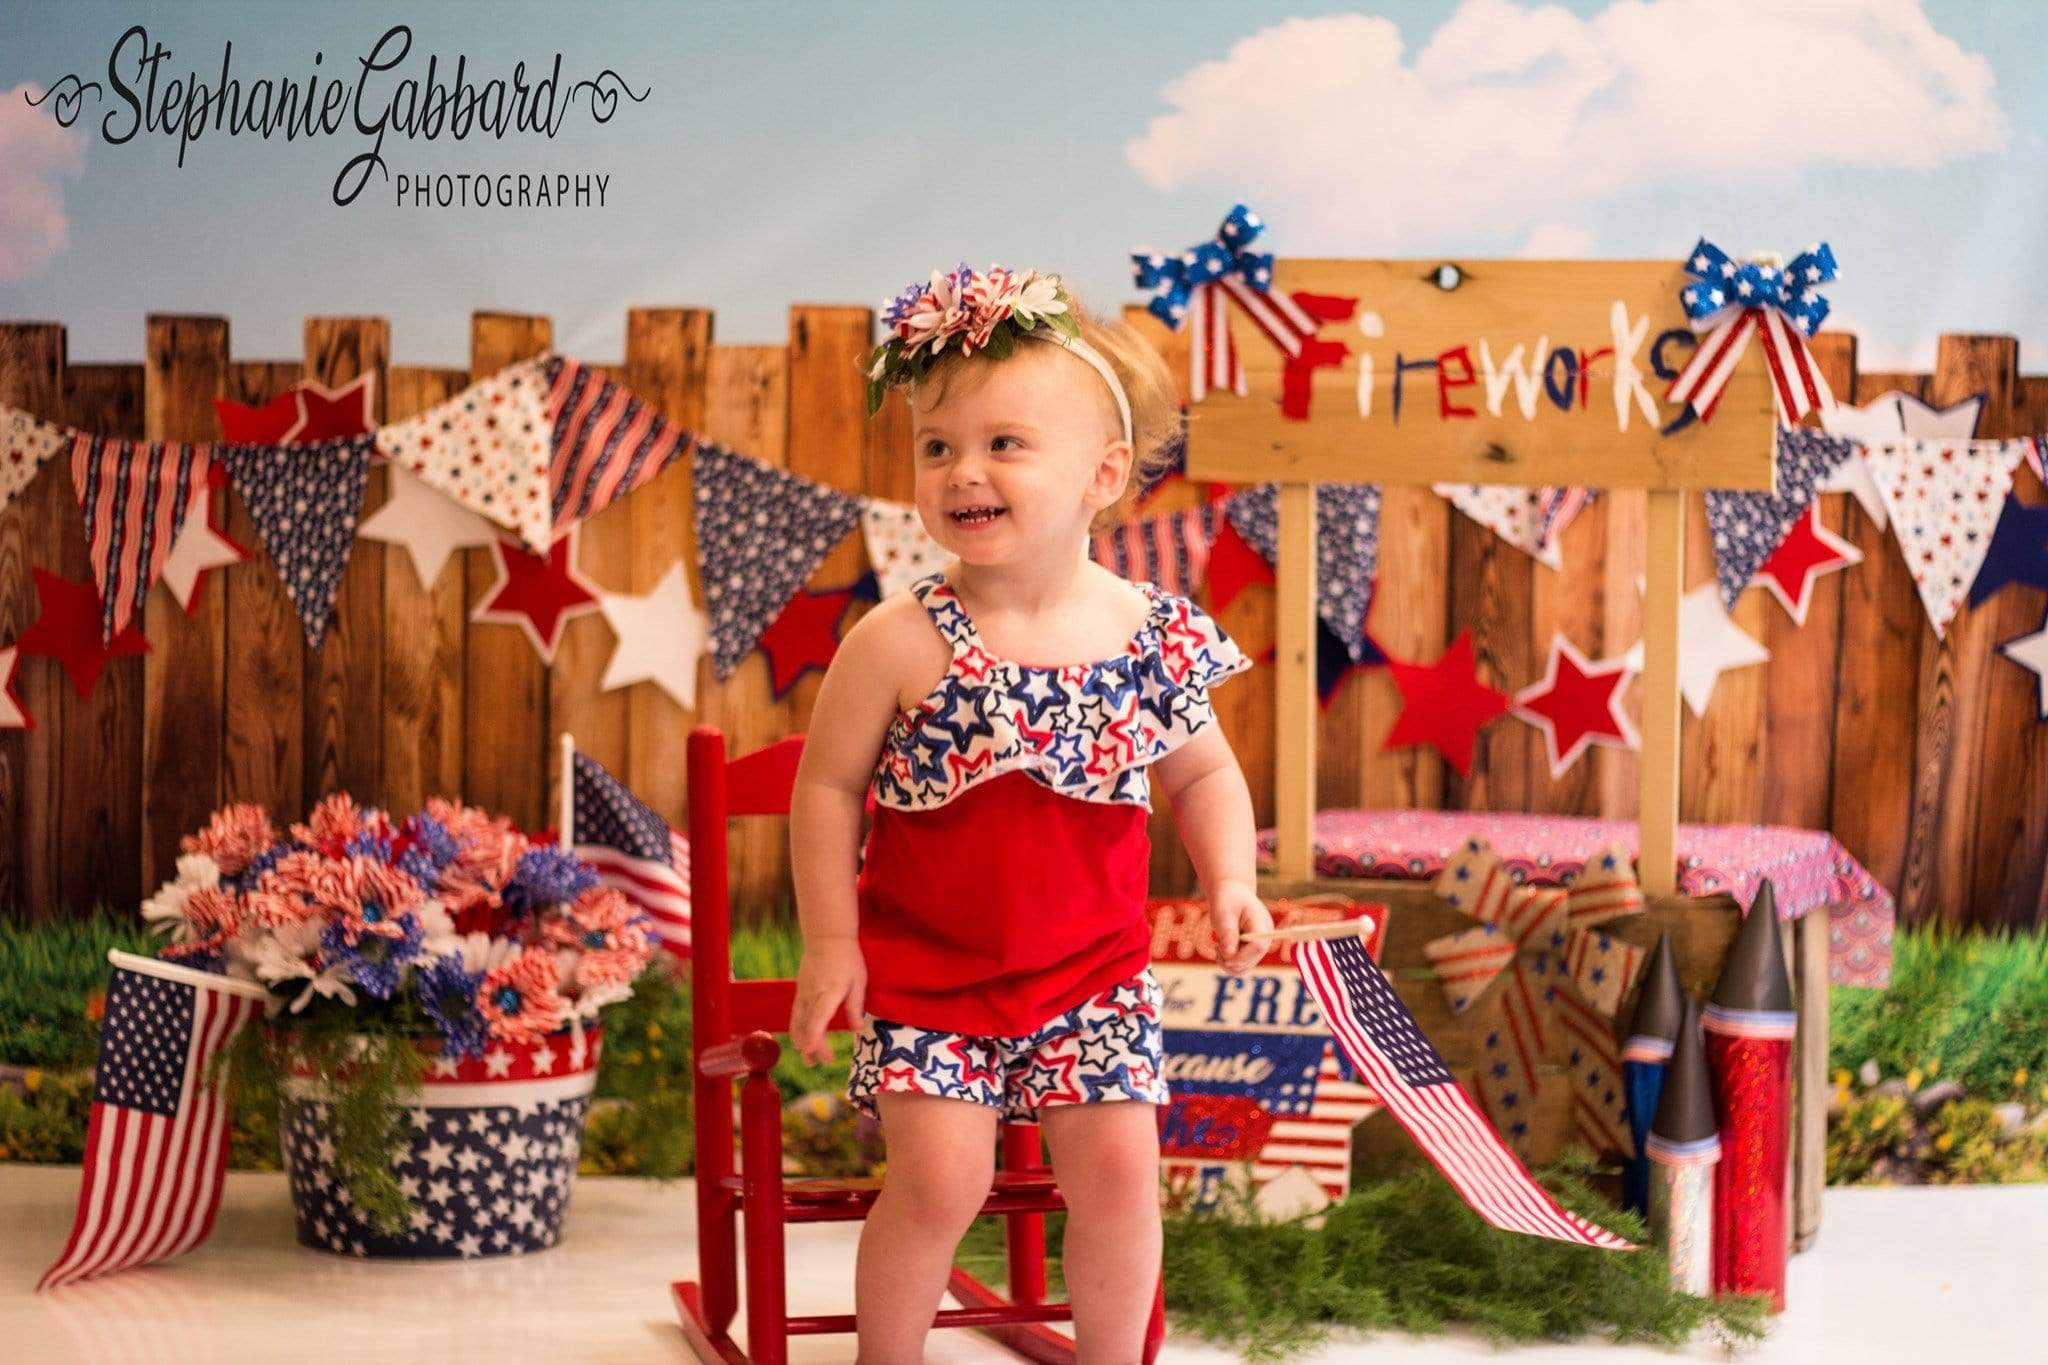 Katebackdrop閹枫垺缍朘ate American Fireworks Stand 4th of July Children Backdrop for Photography Designed by Stephanie Gabbard